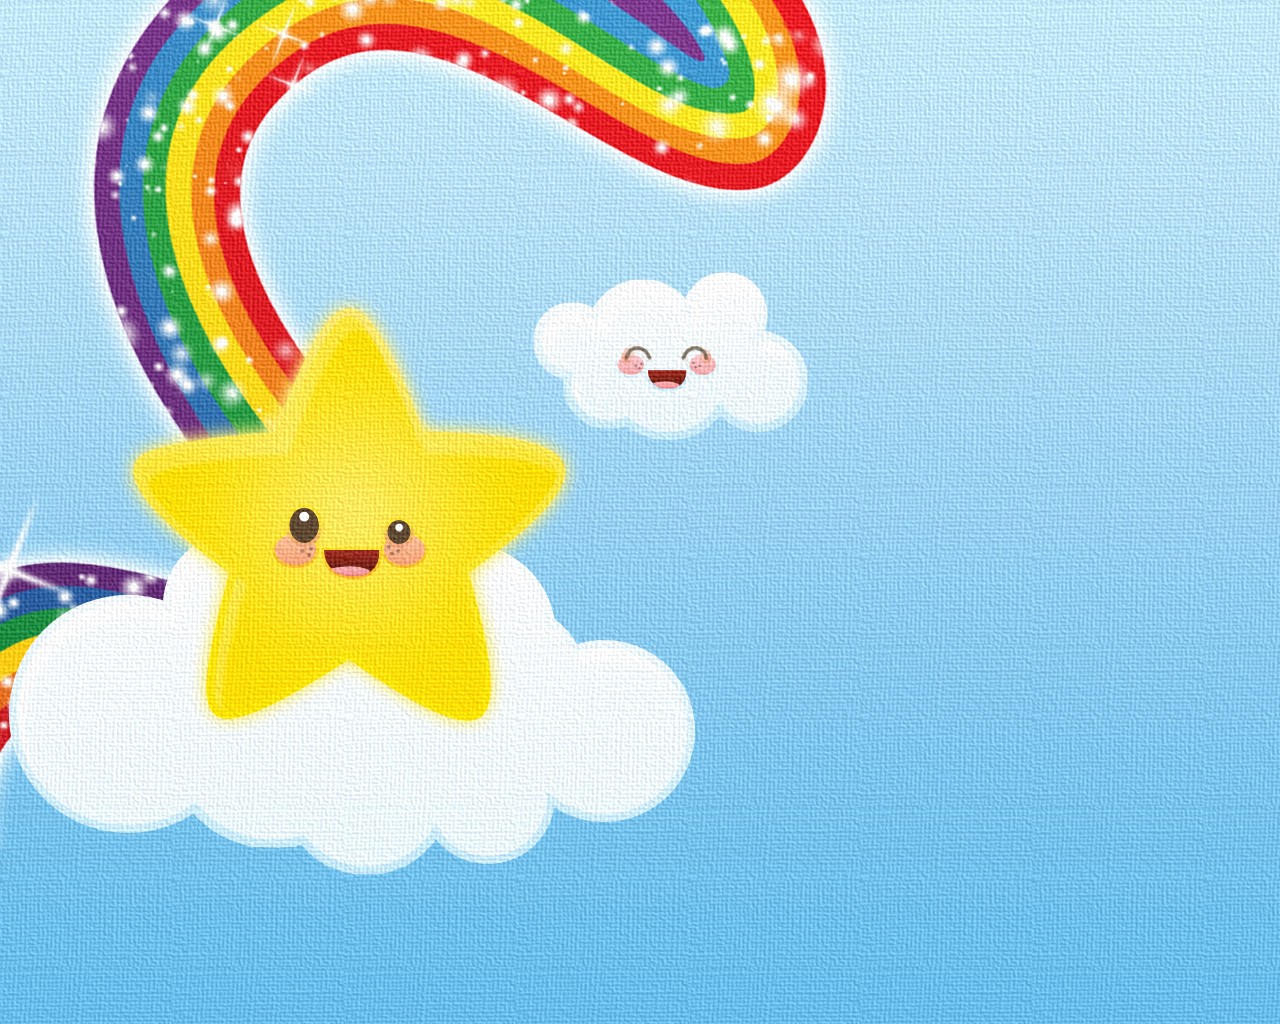 General 1280x1024 colorful stars rainbows fantasy art simple background clouds